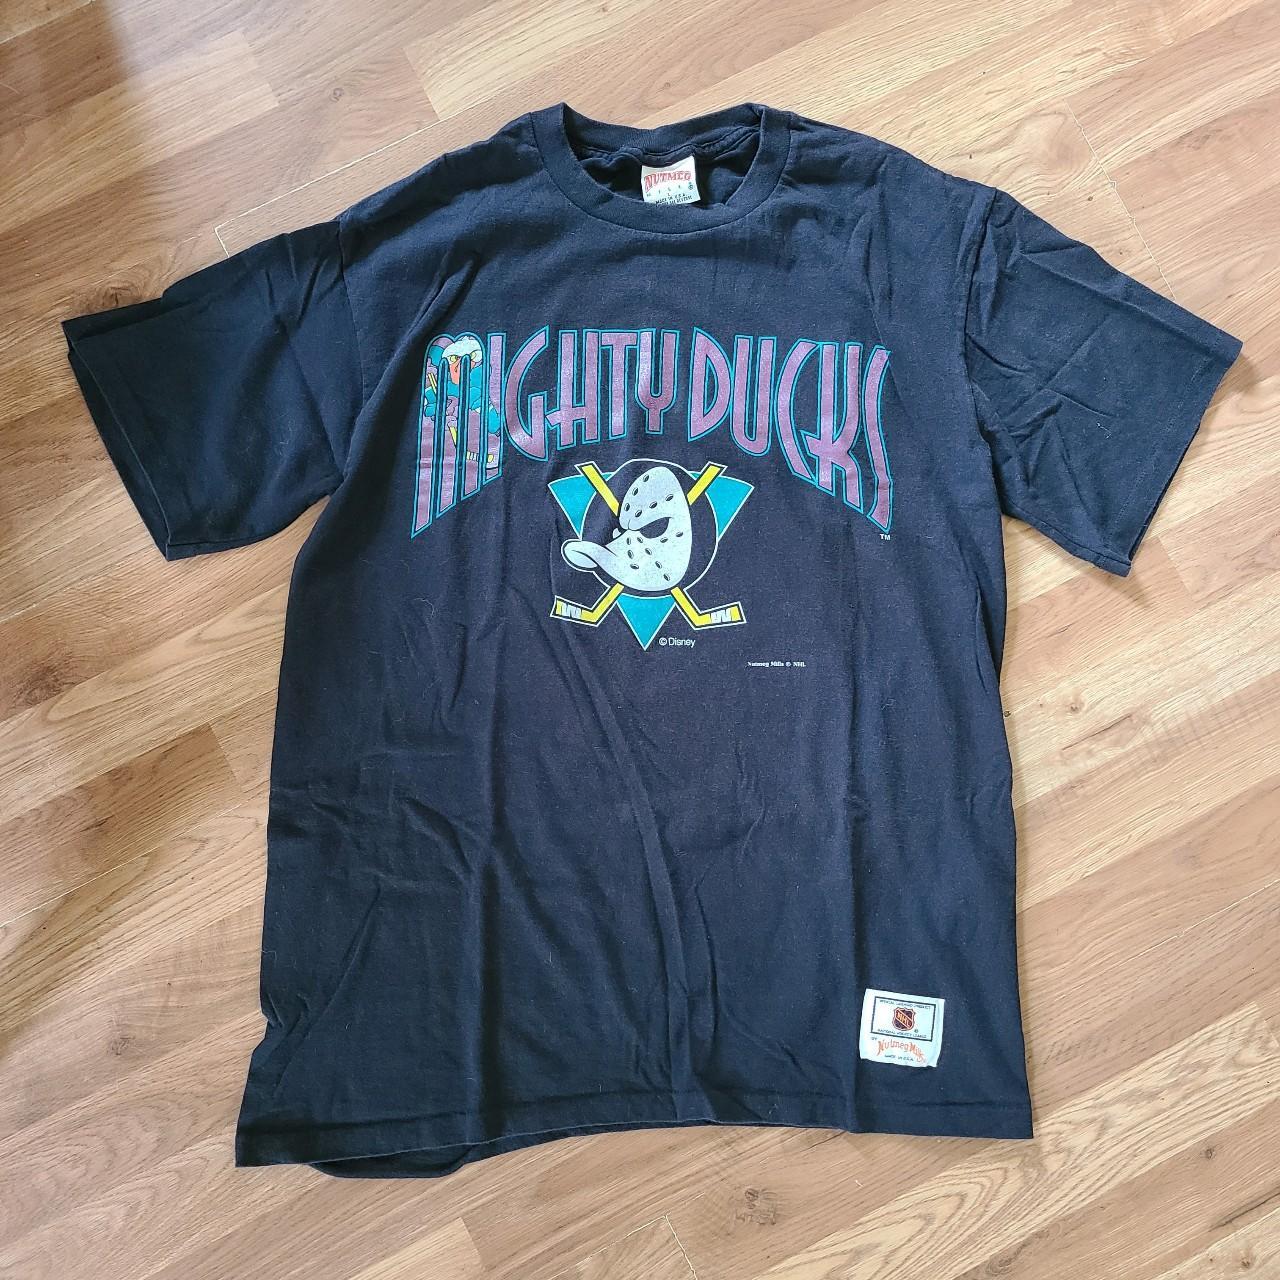 Mighty Ducks T-Shirts for Sale